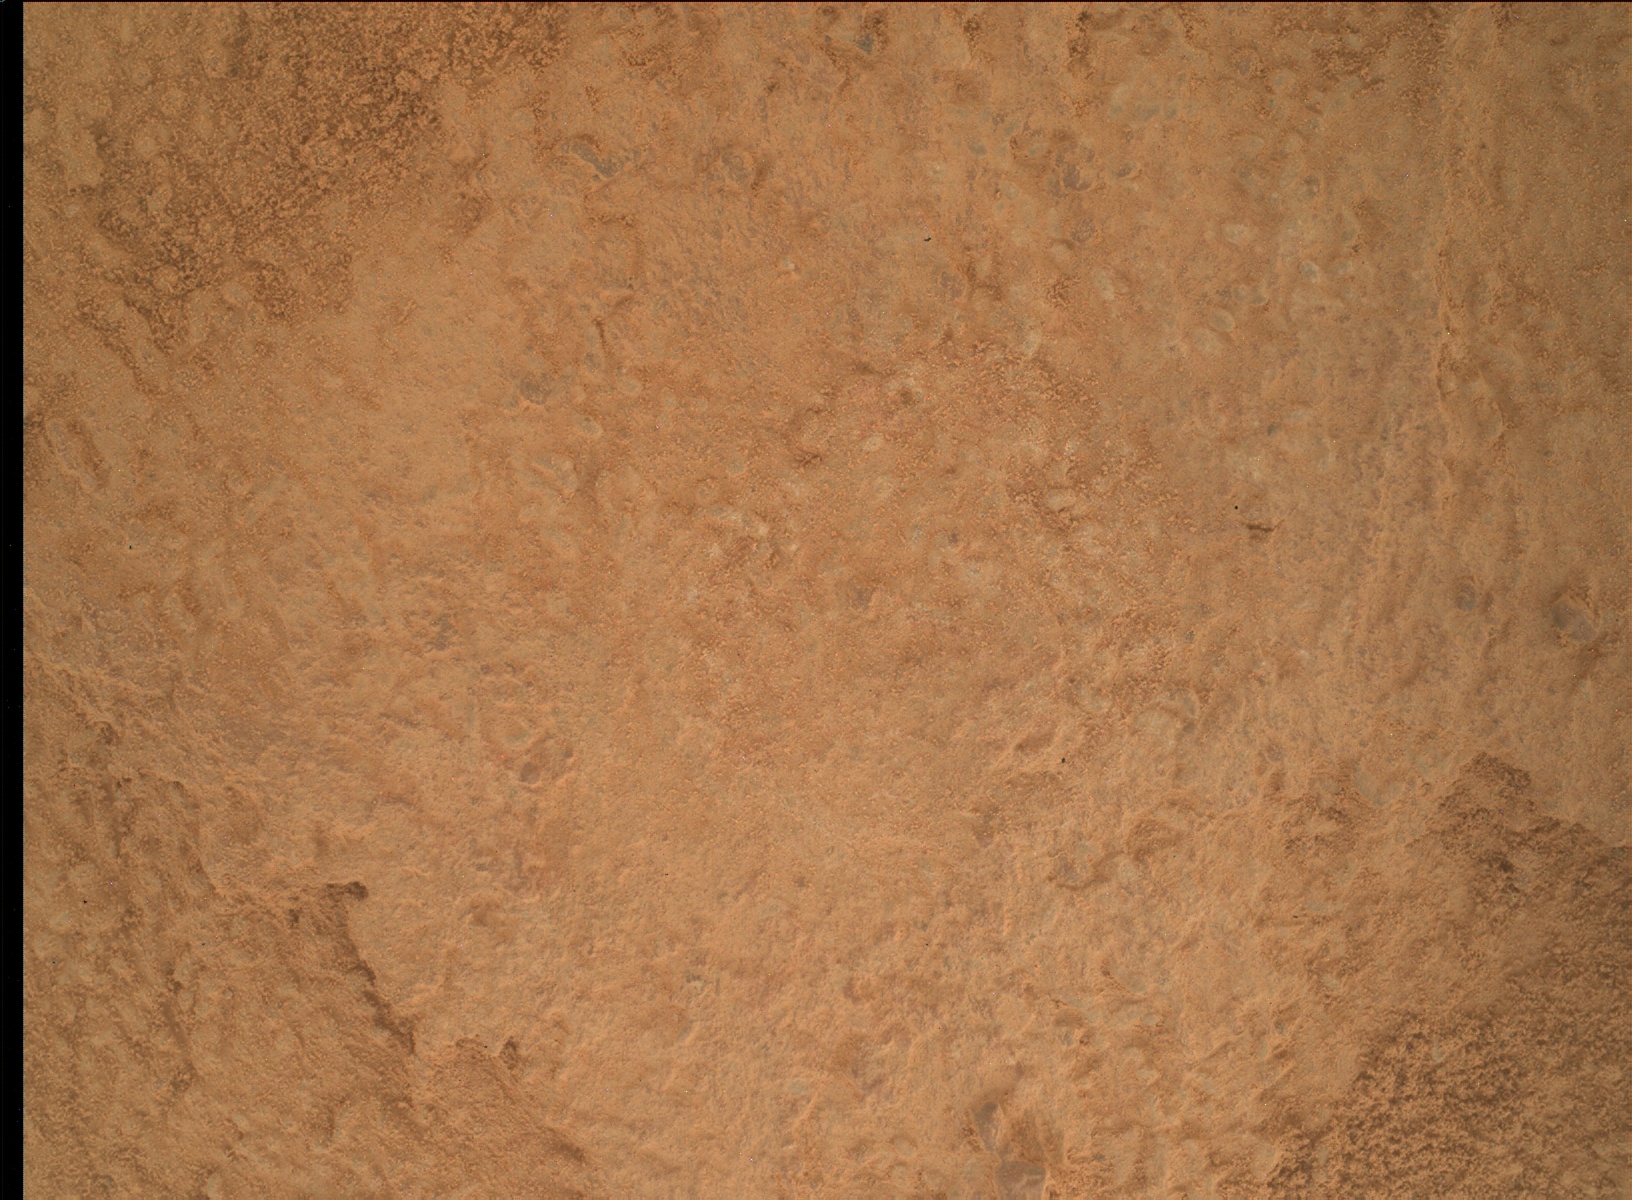 Nasa's Mars rover Curiosity acquired this image using its Mars Hand Lens Imager (MAHLI) on Sol 3560